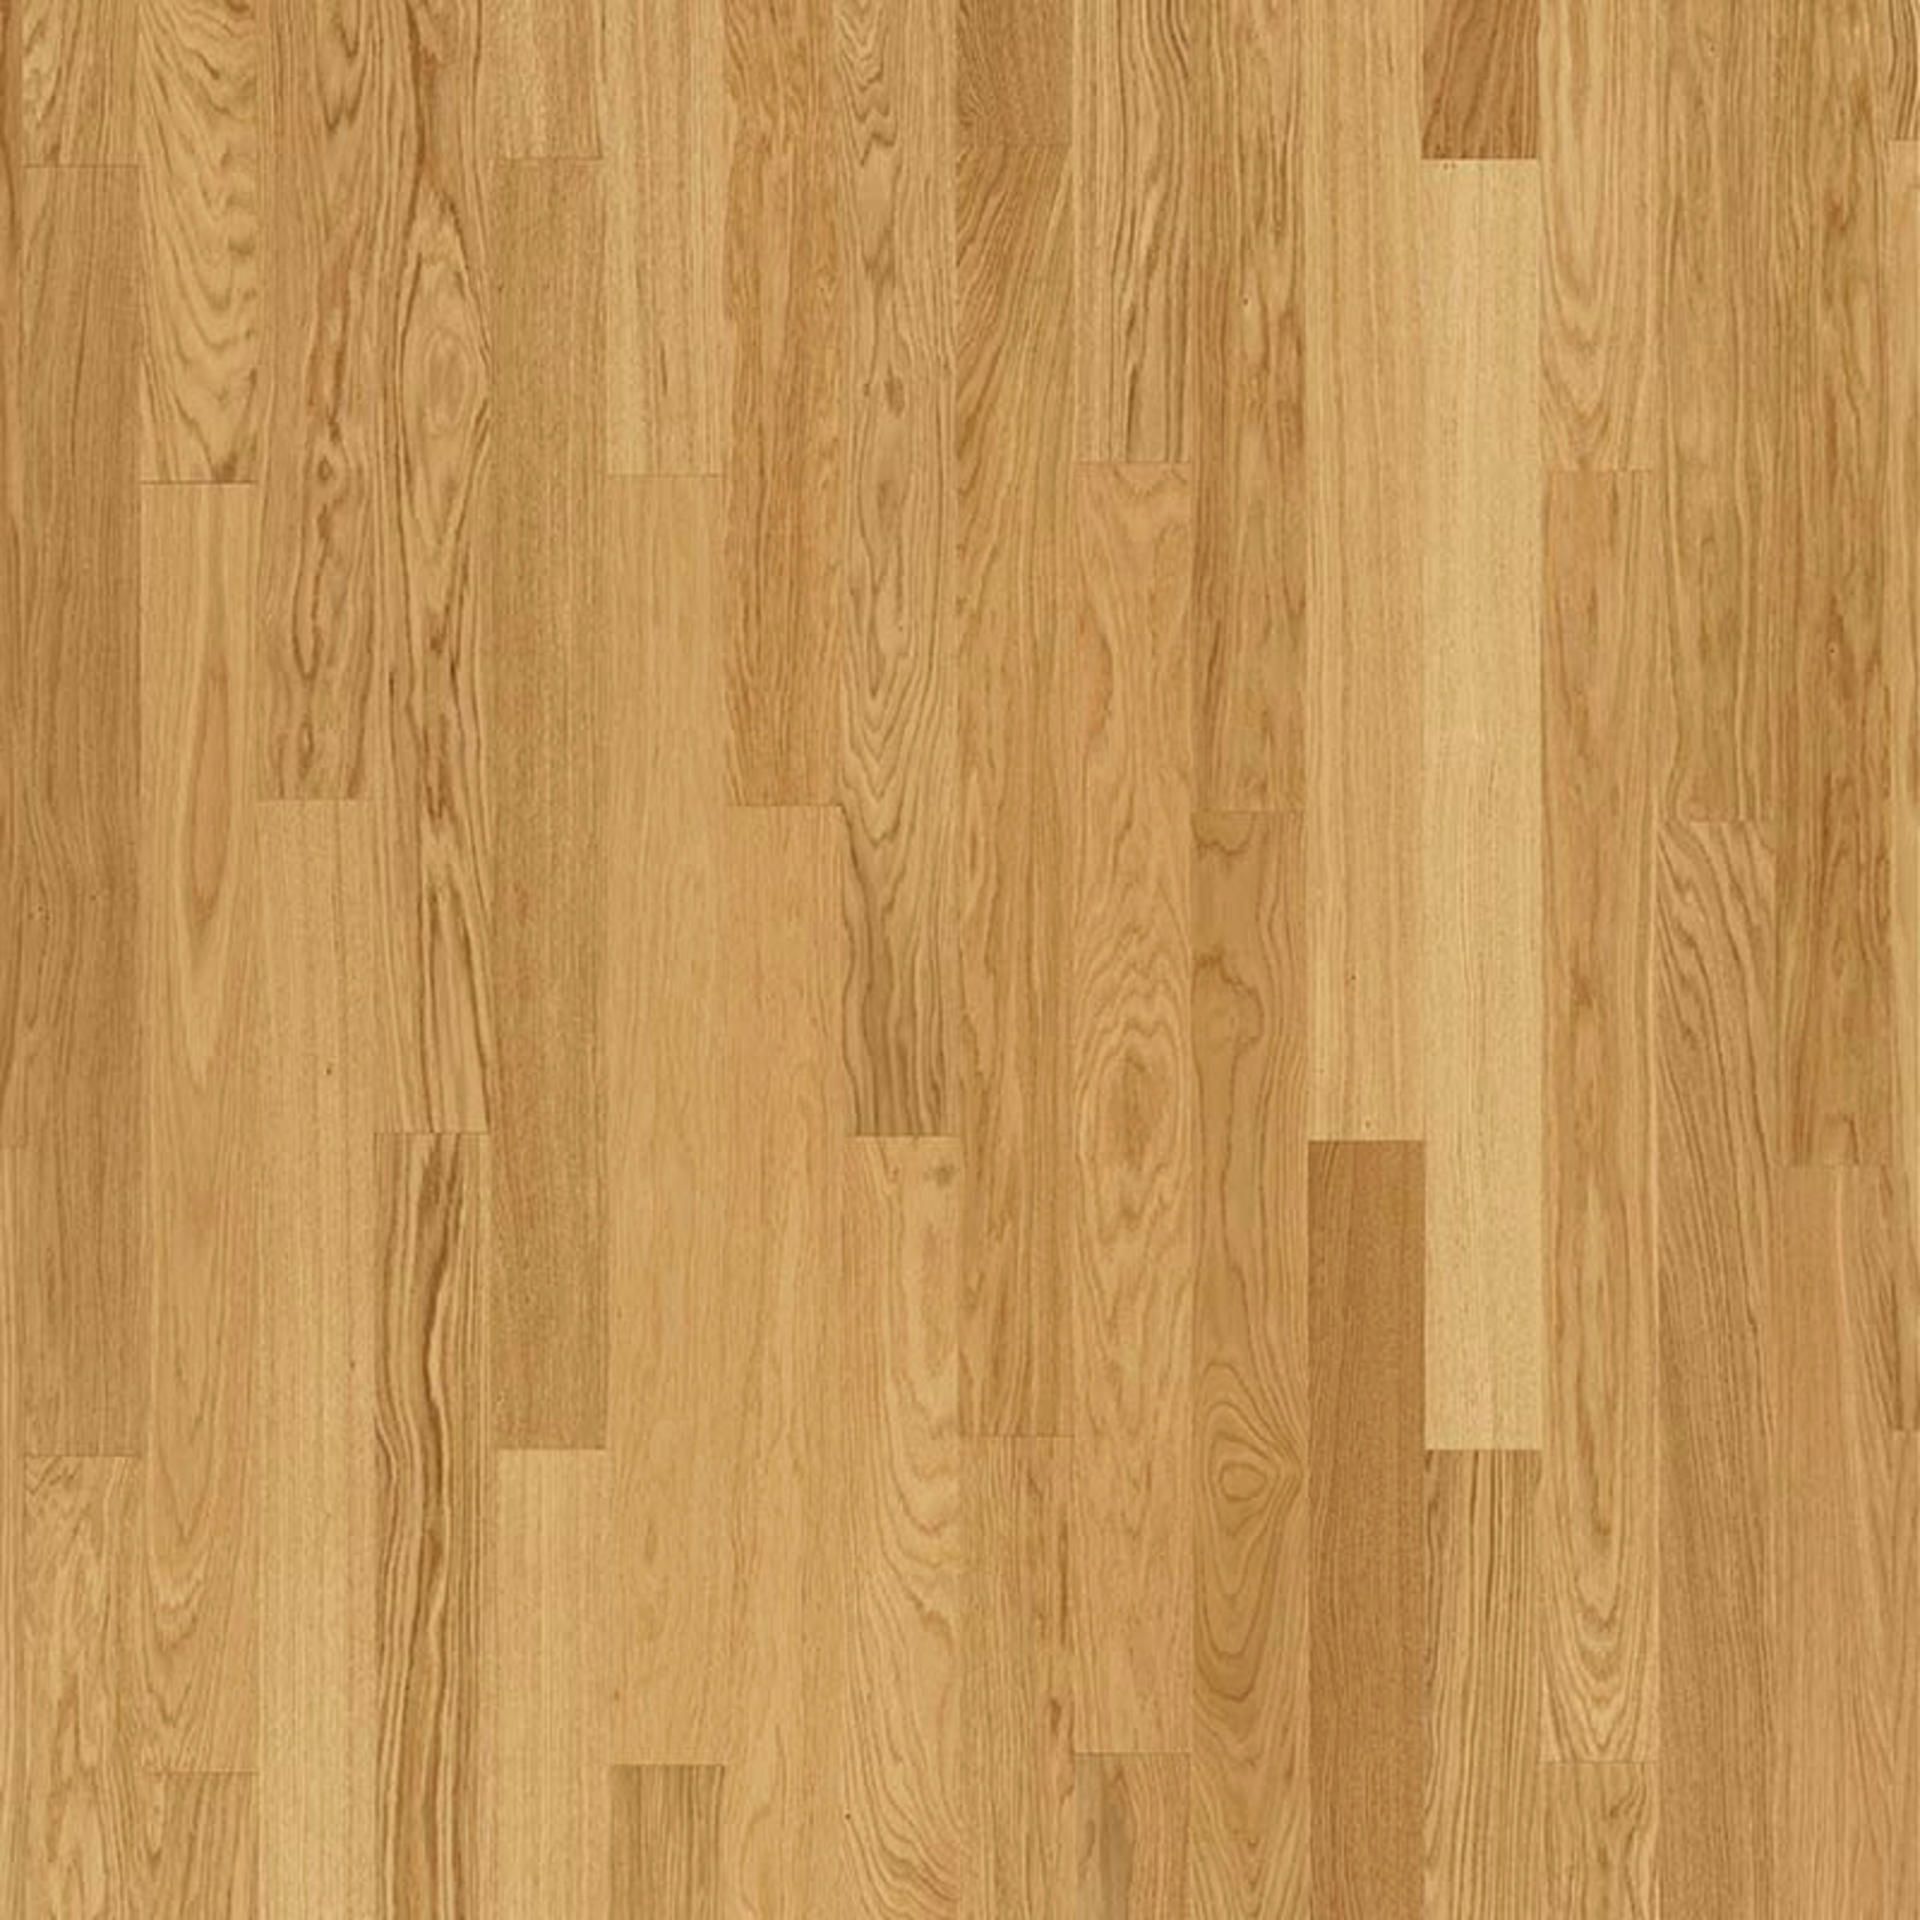 Holzboden Eiche NATURE 1 Stab MADRID-TB15 Planke 110 x 1220 mm